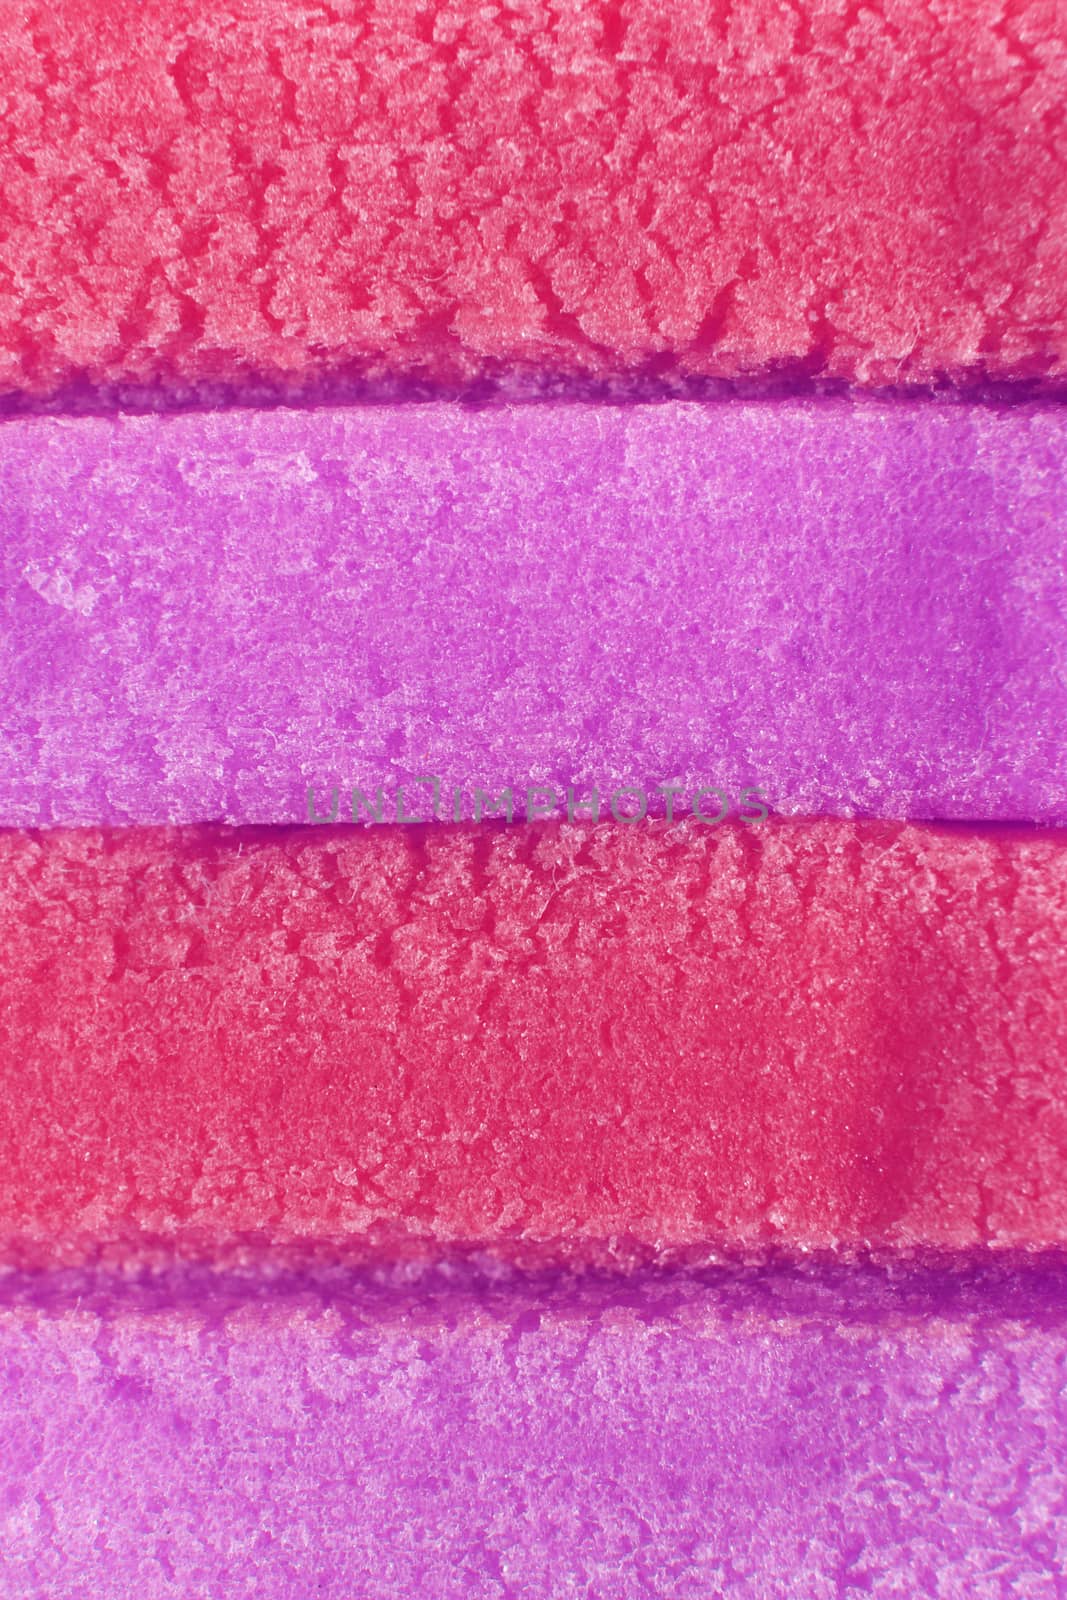 Lilac Pink Colored Bubble Gum Texture. Freshness Gummy Delicious Background. Yummy Backdrop. Macro Closeup.